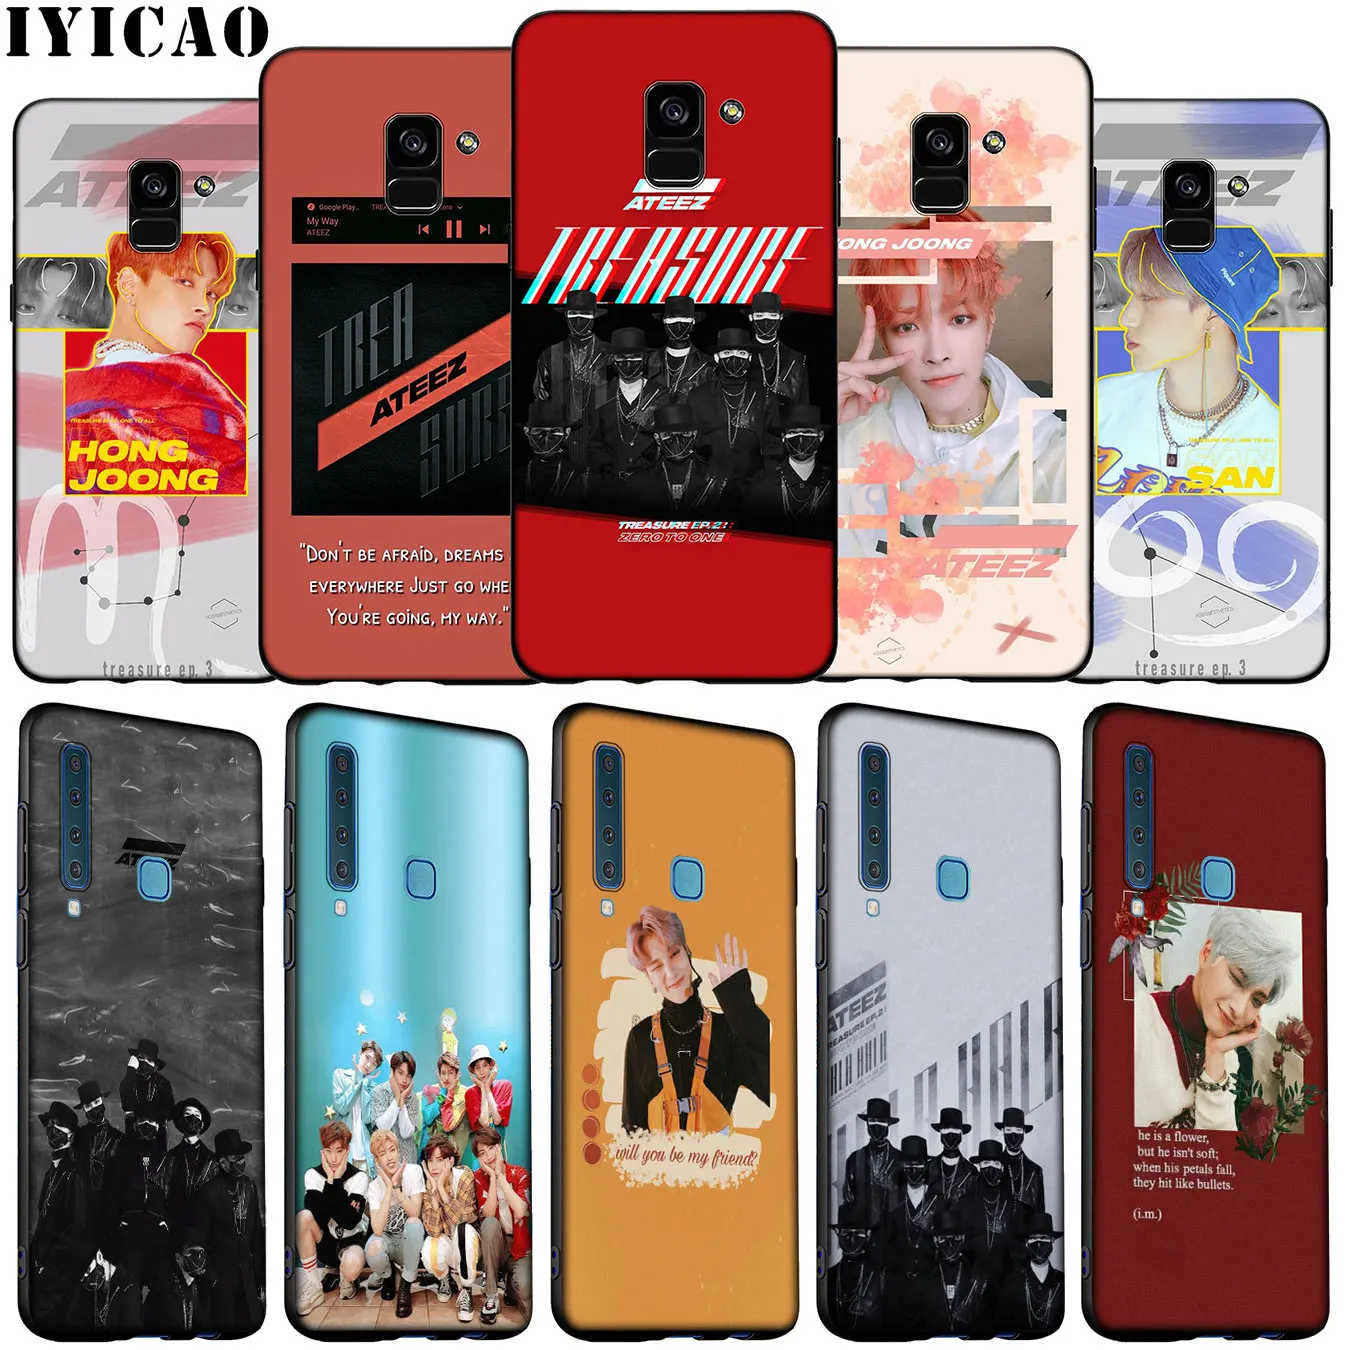 Фото ATEEZ KPOP Soft Silicone Phone Case for Samsung Galaxy A6 Plus A9 A8 A7 2018 A3 A5 2016 2017 Note 9 8 10 Cover | Мобильные телефоны